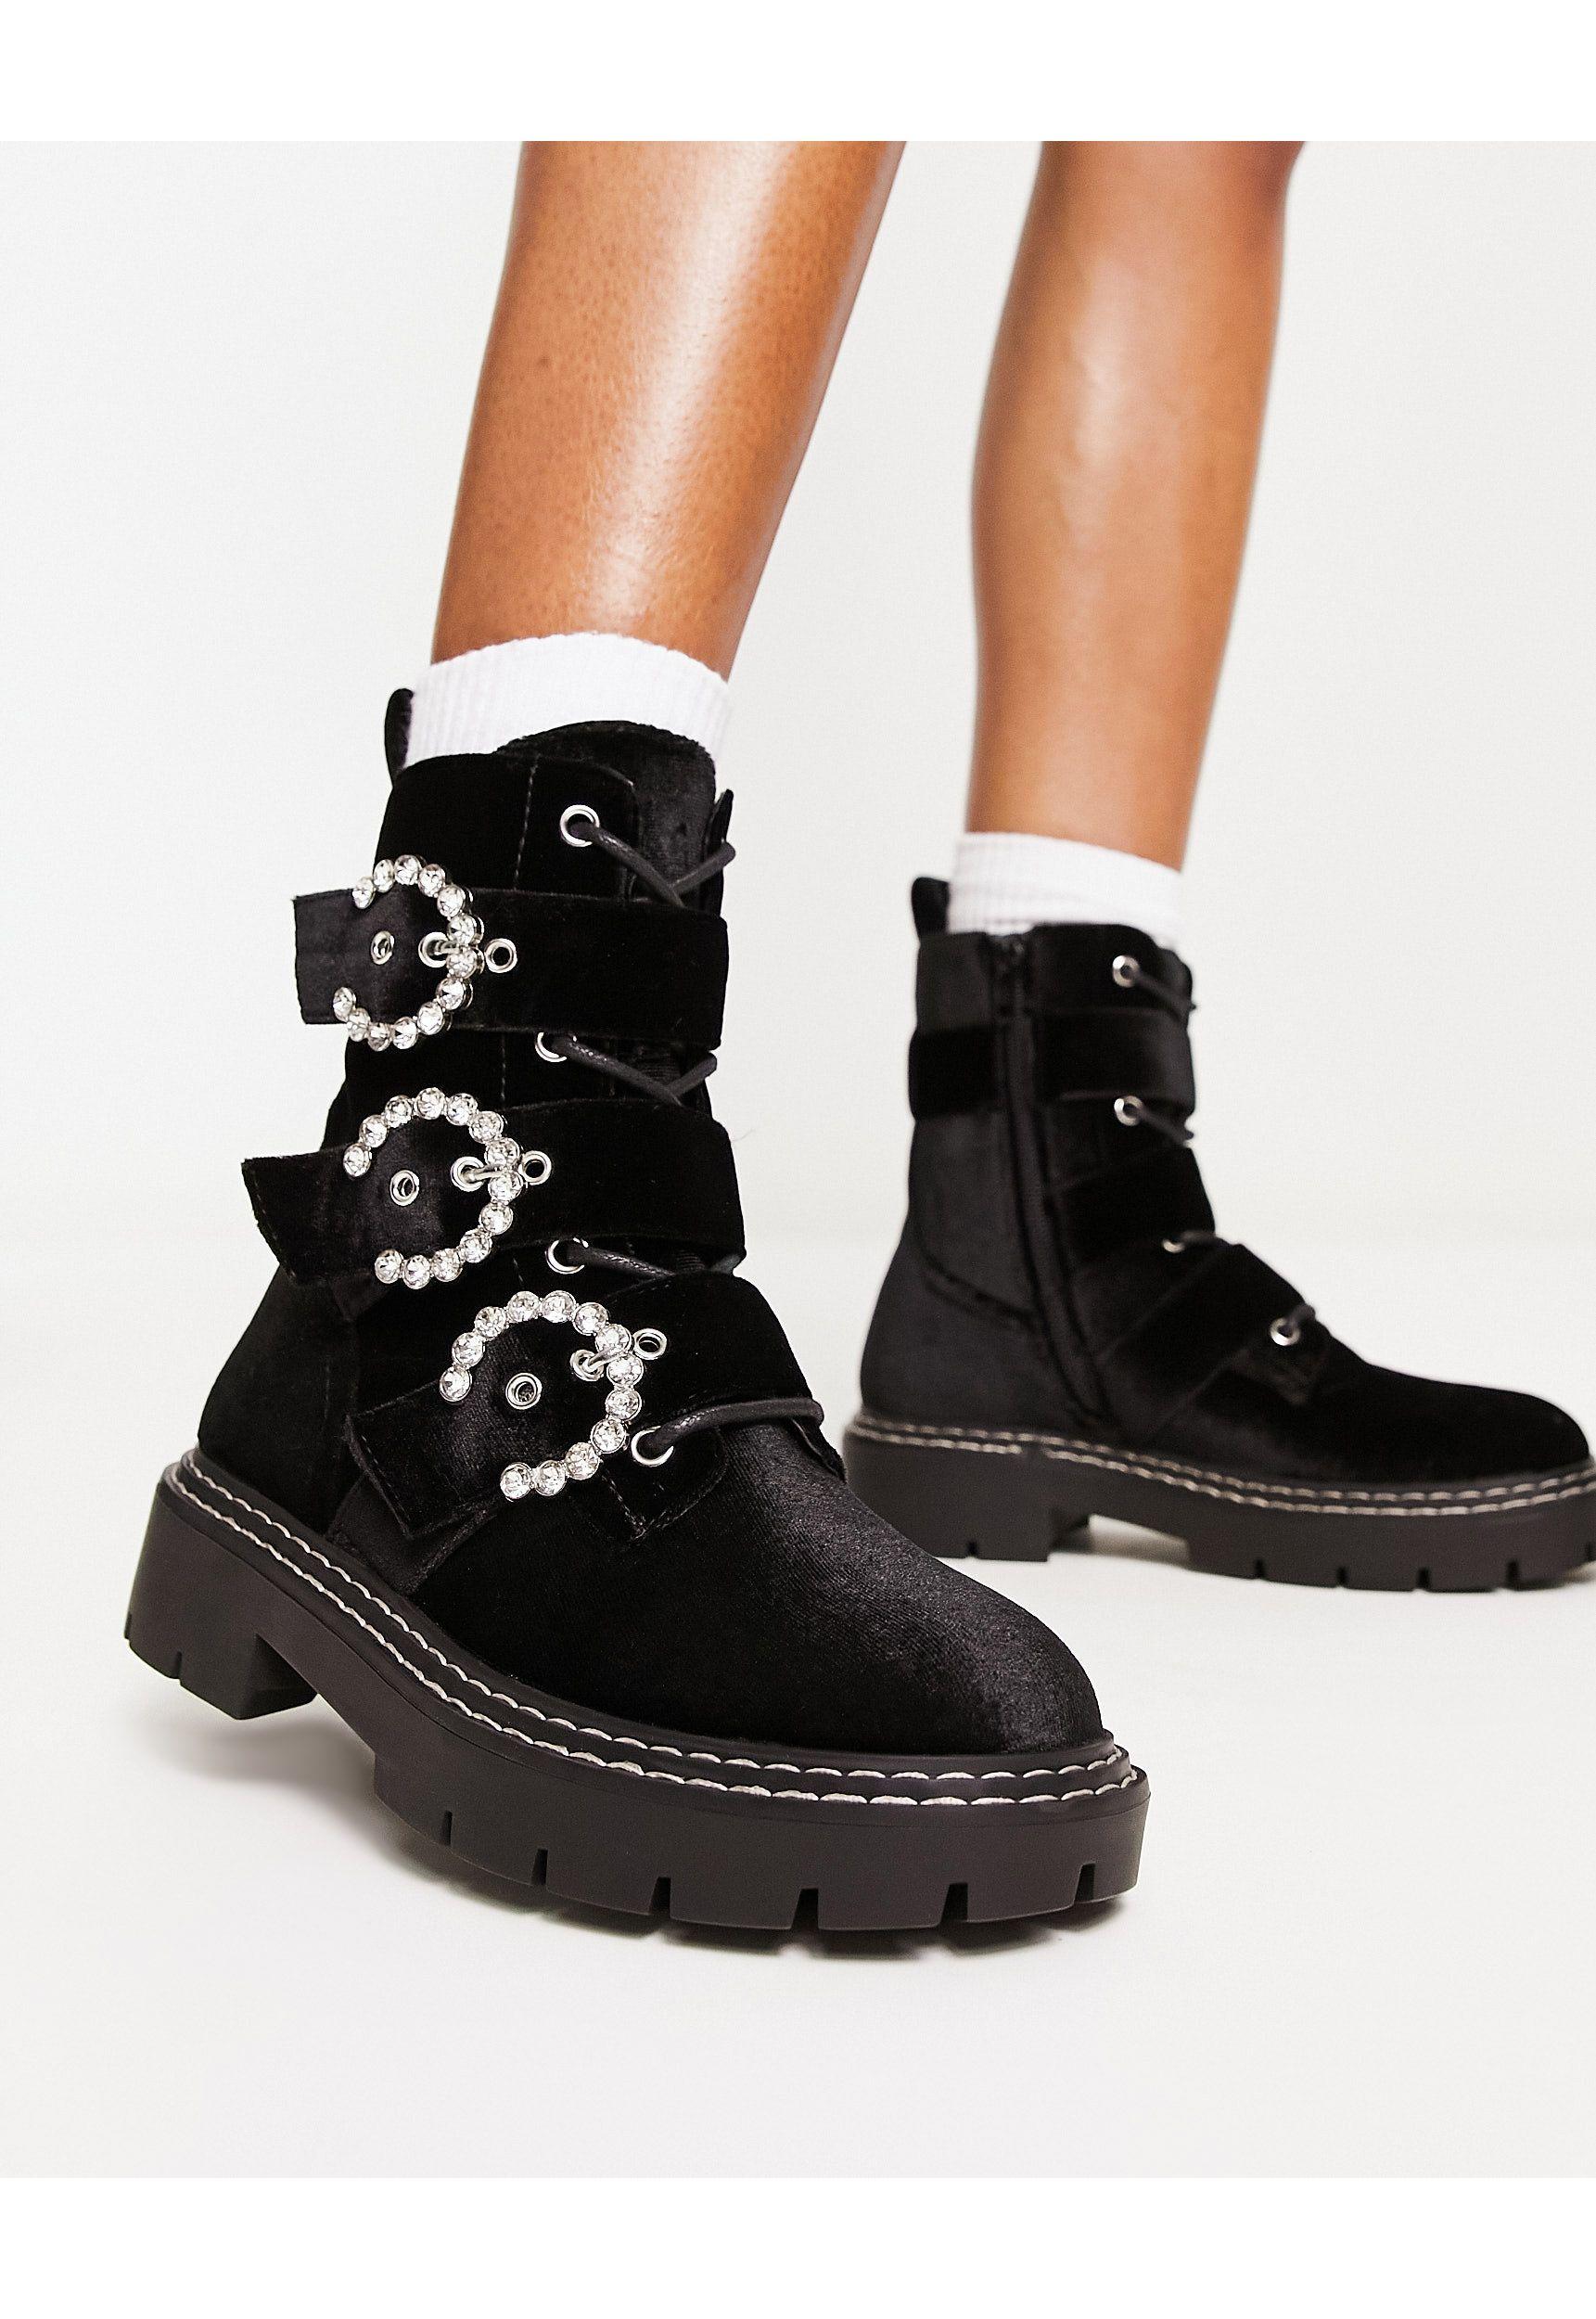 River Island Lace Up Velvet Jewel Buckle Boot in Black | Lyst